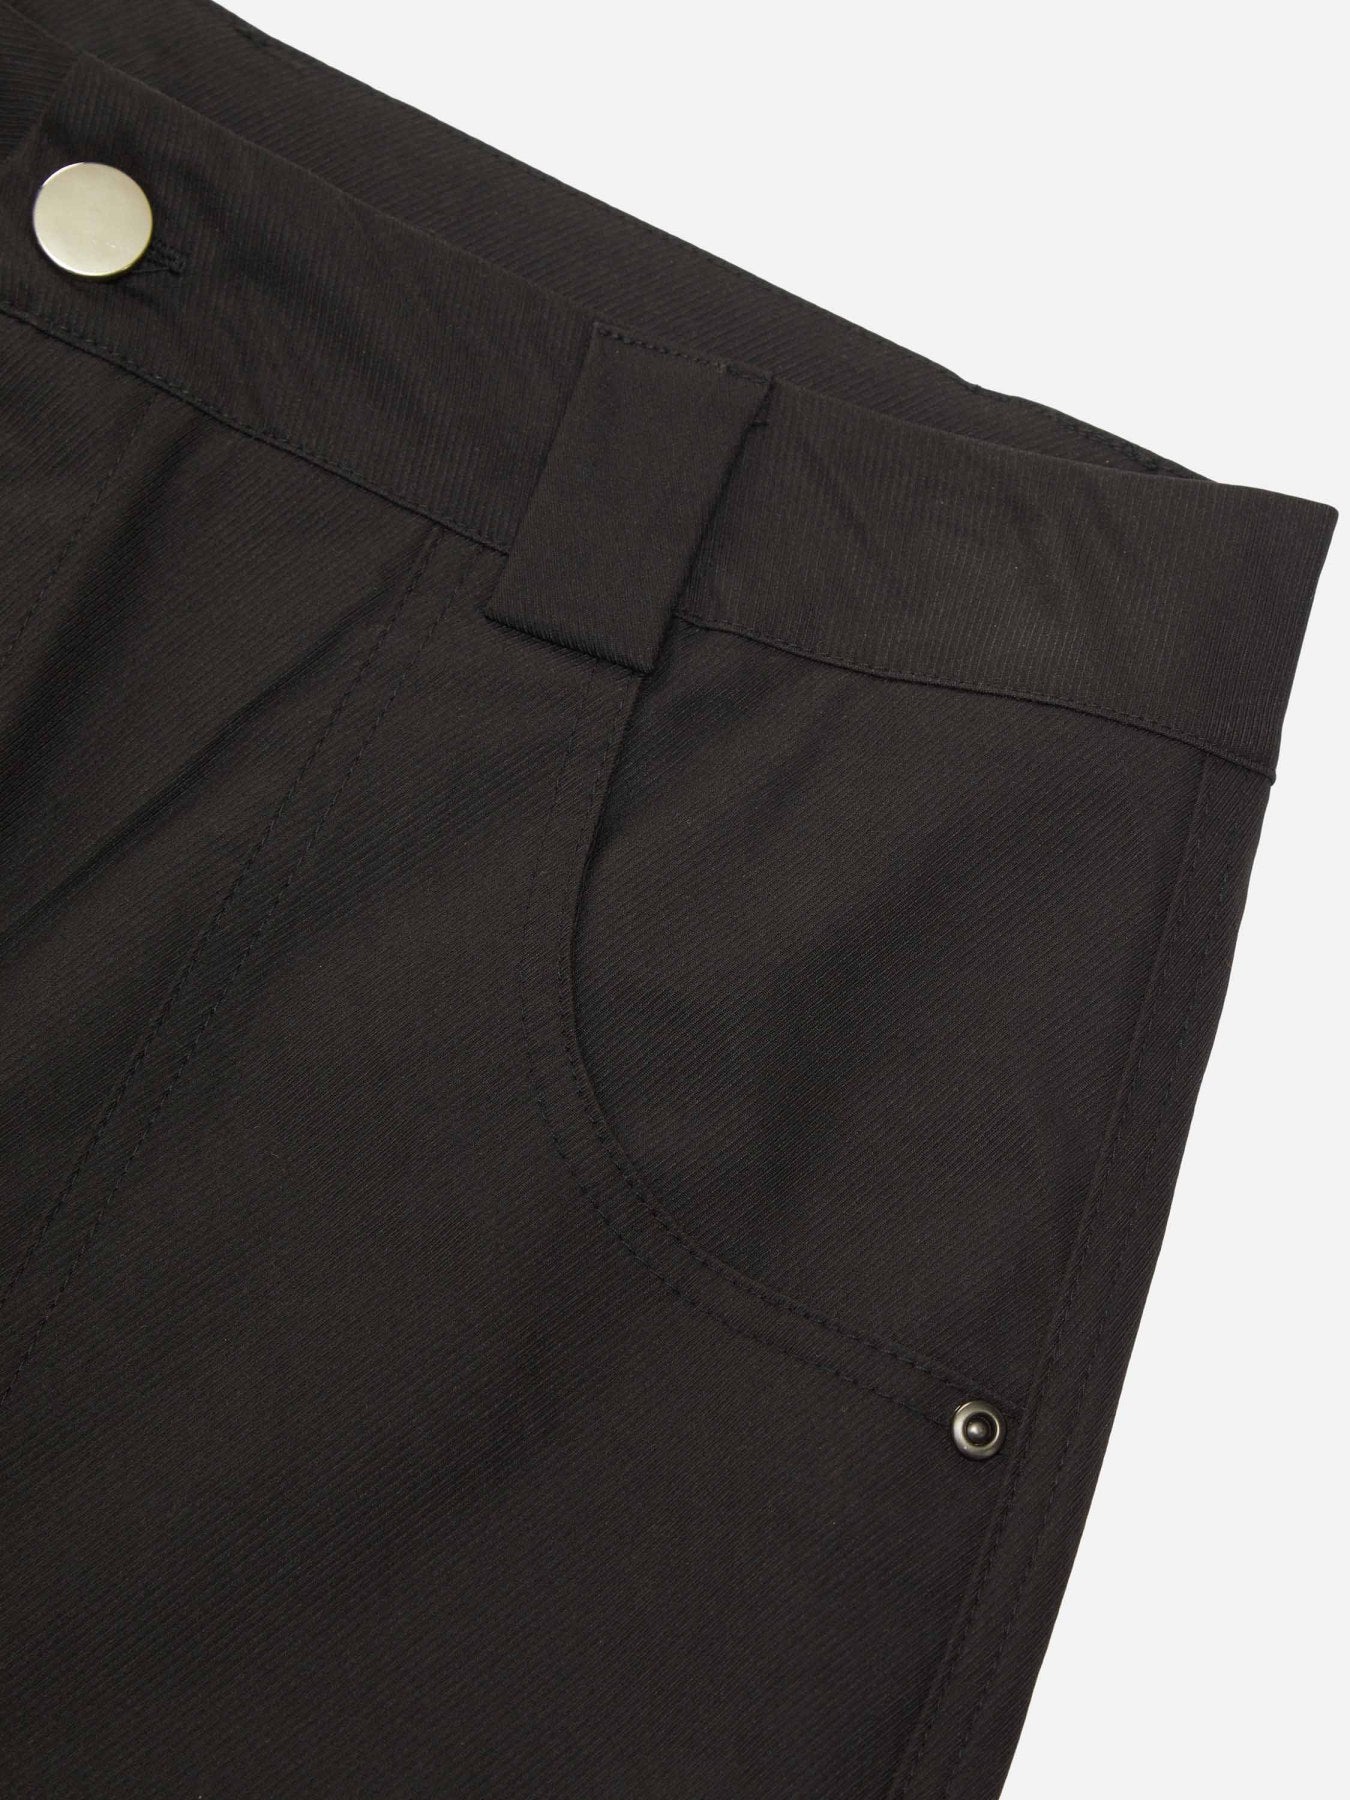 Thesupermade Multi-pocket Cargo Pants